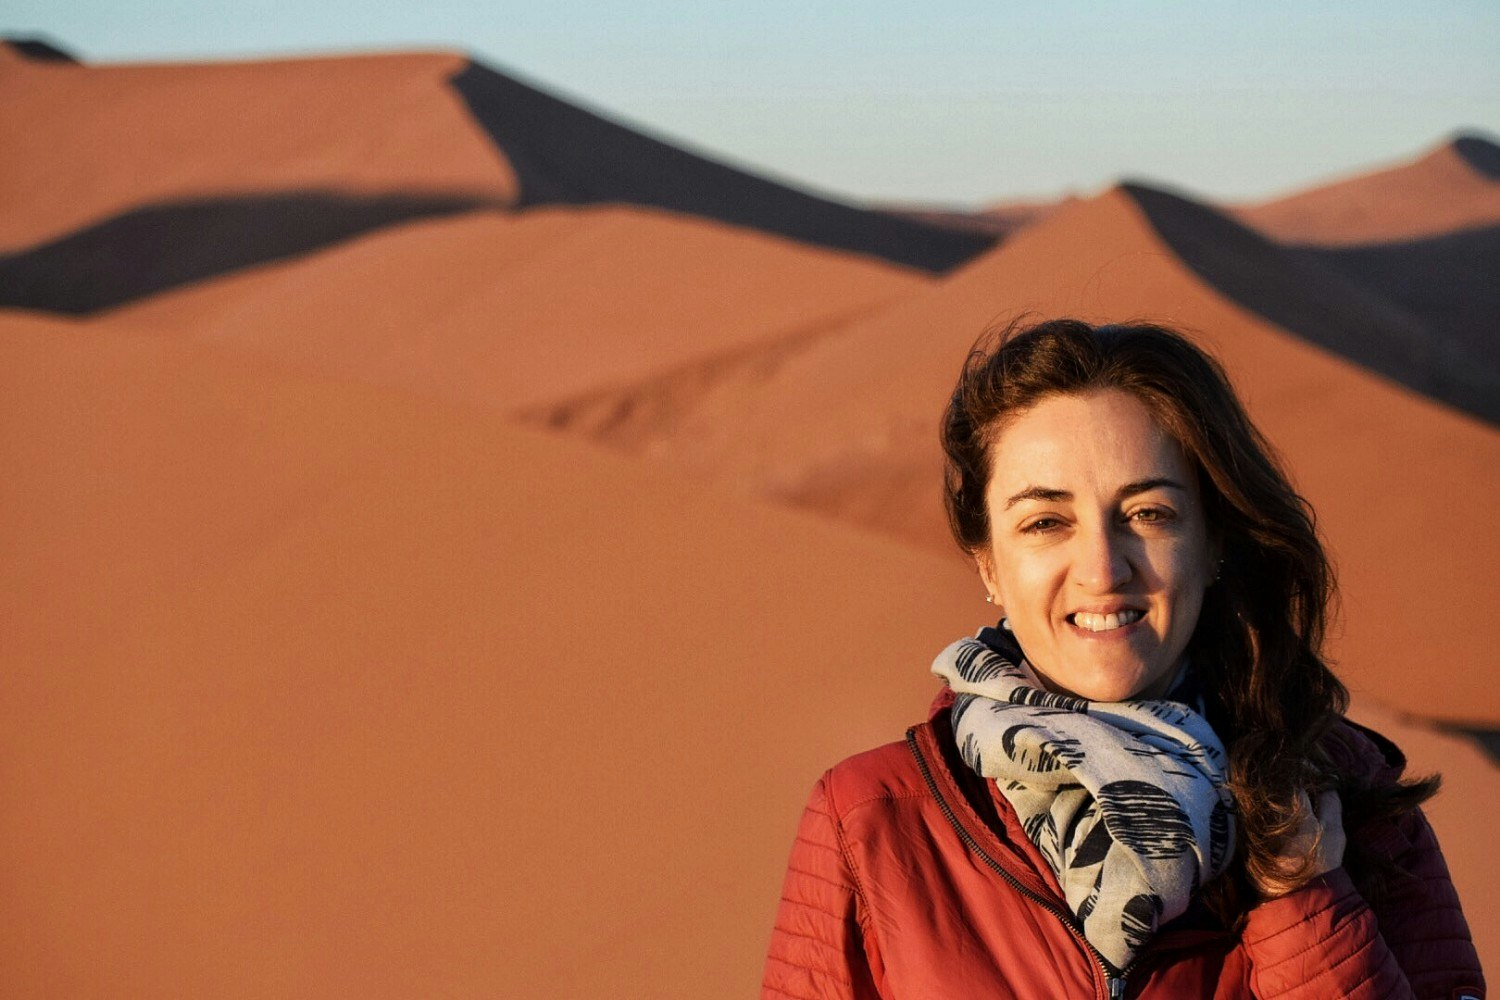 Claudia poses in front of steep sand dunes in a red jacket